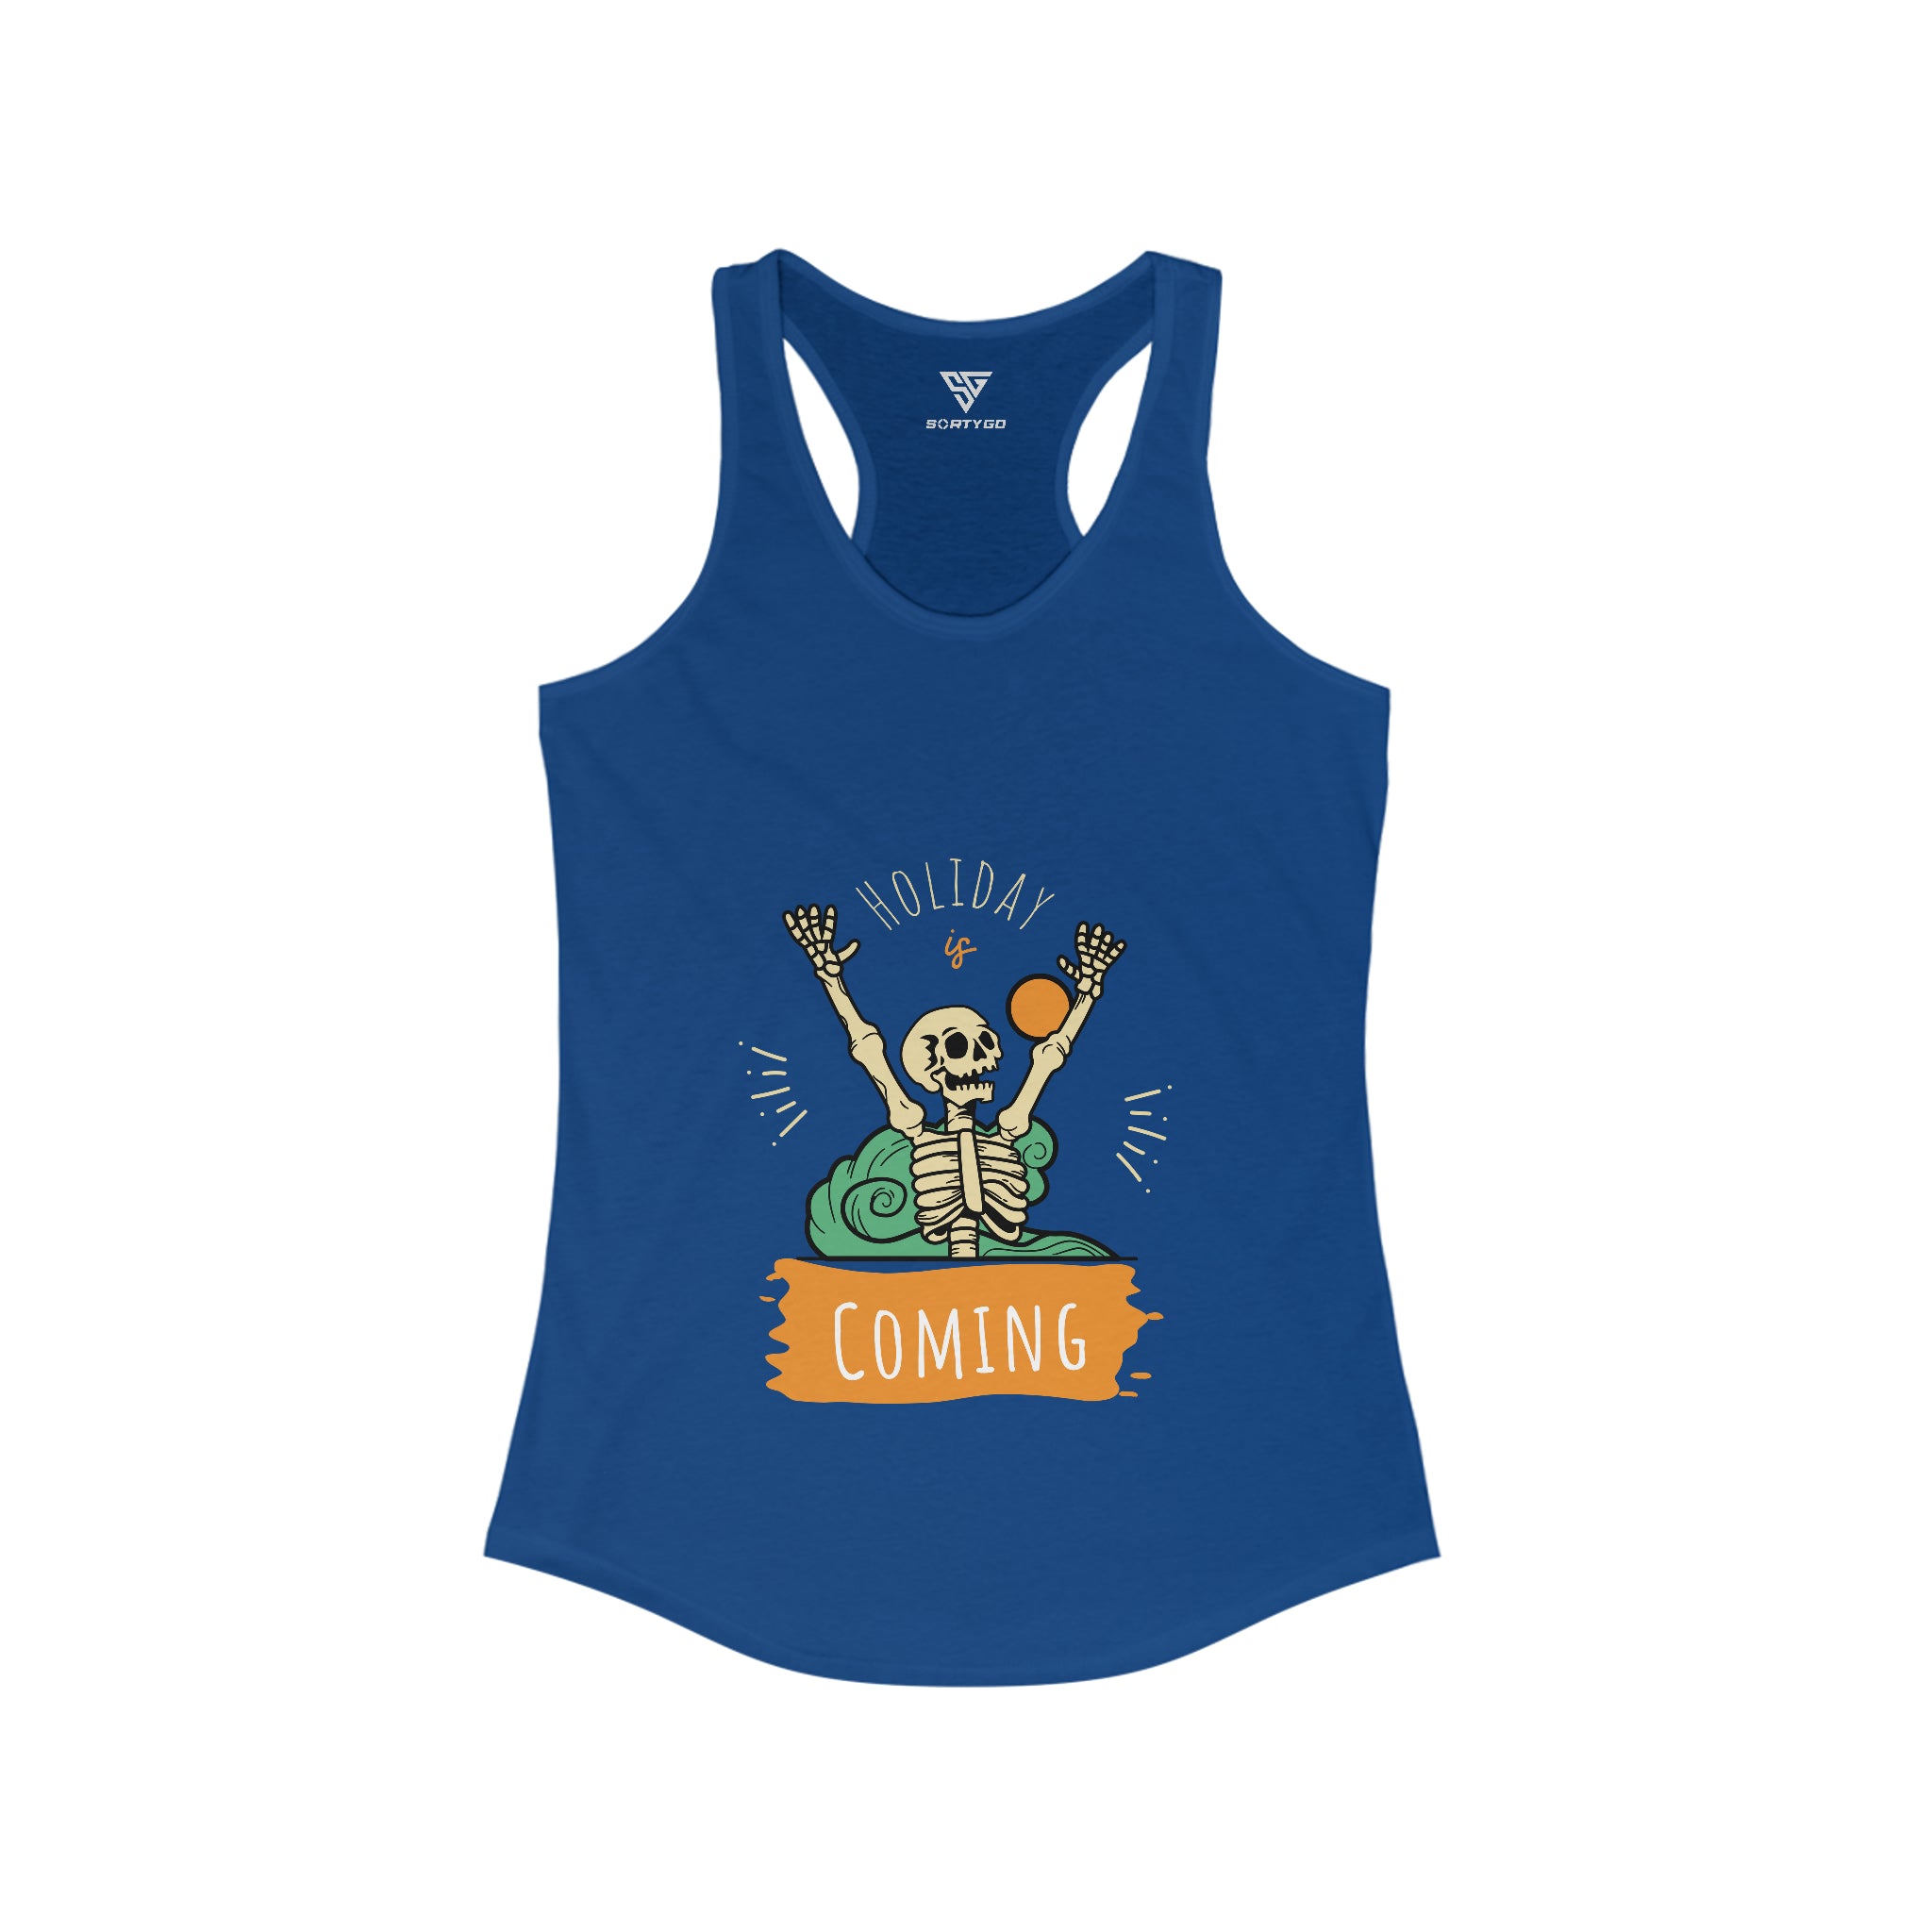 SORTYGO - Holiday is Coming Women Ideal Racerback Tank in Solid Royal